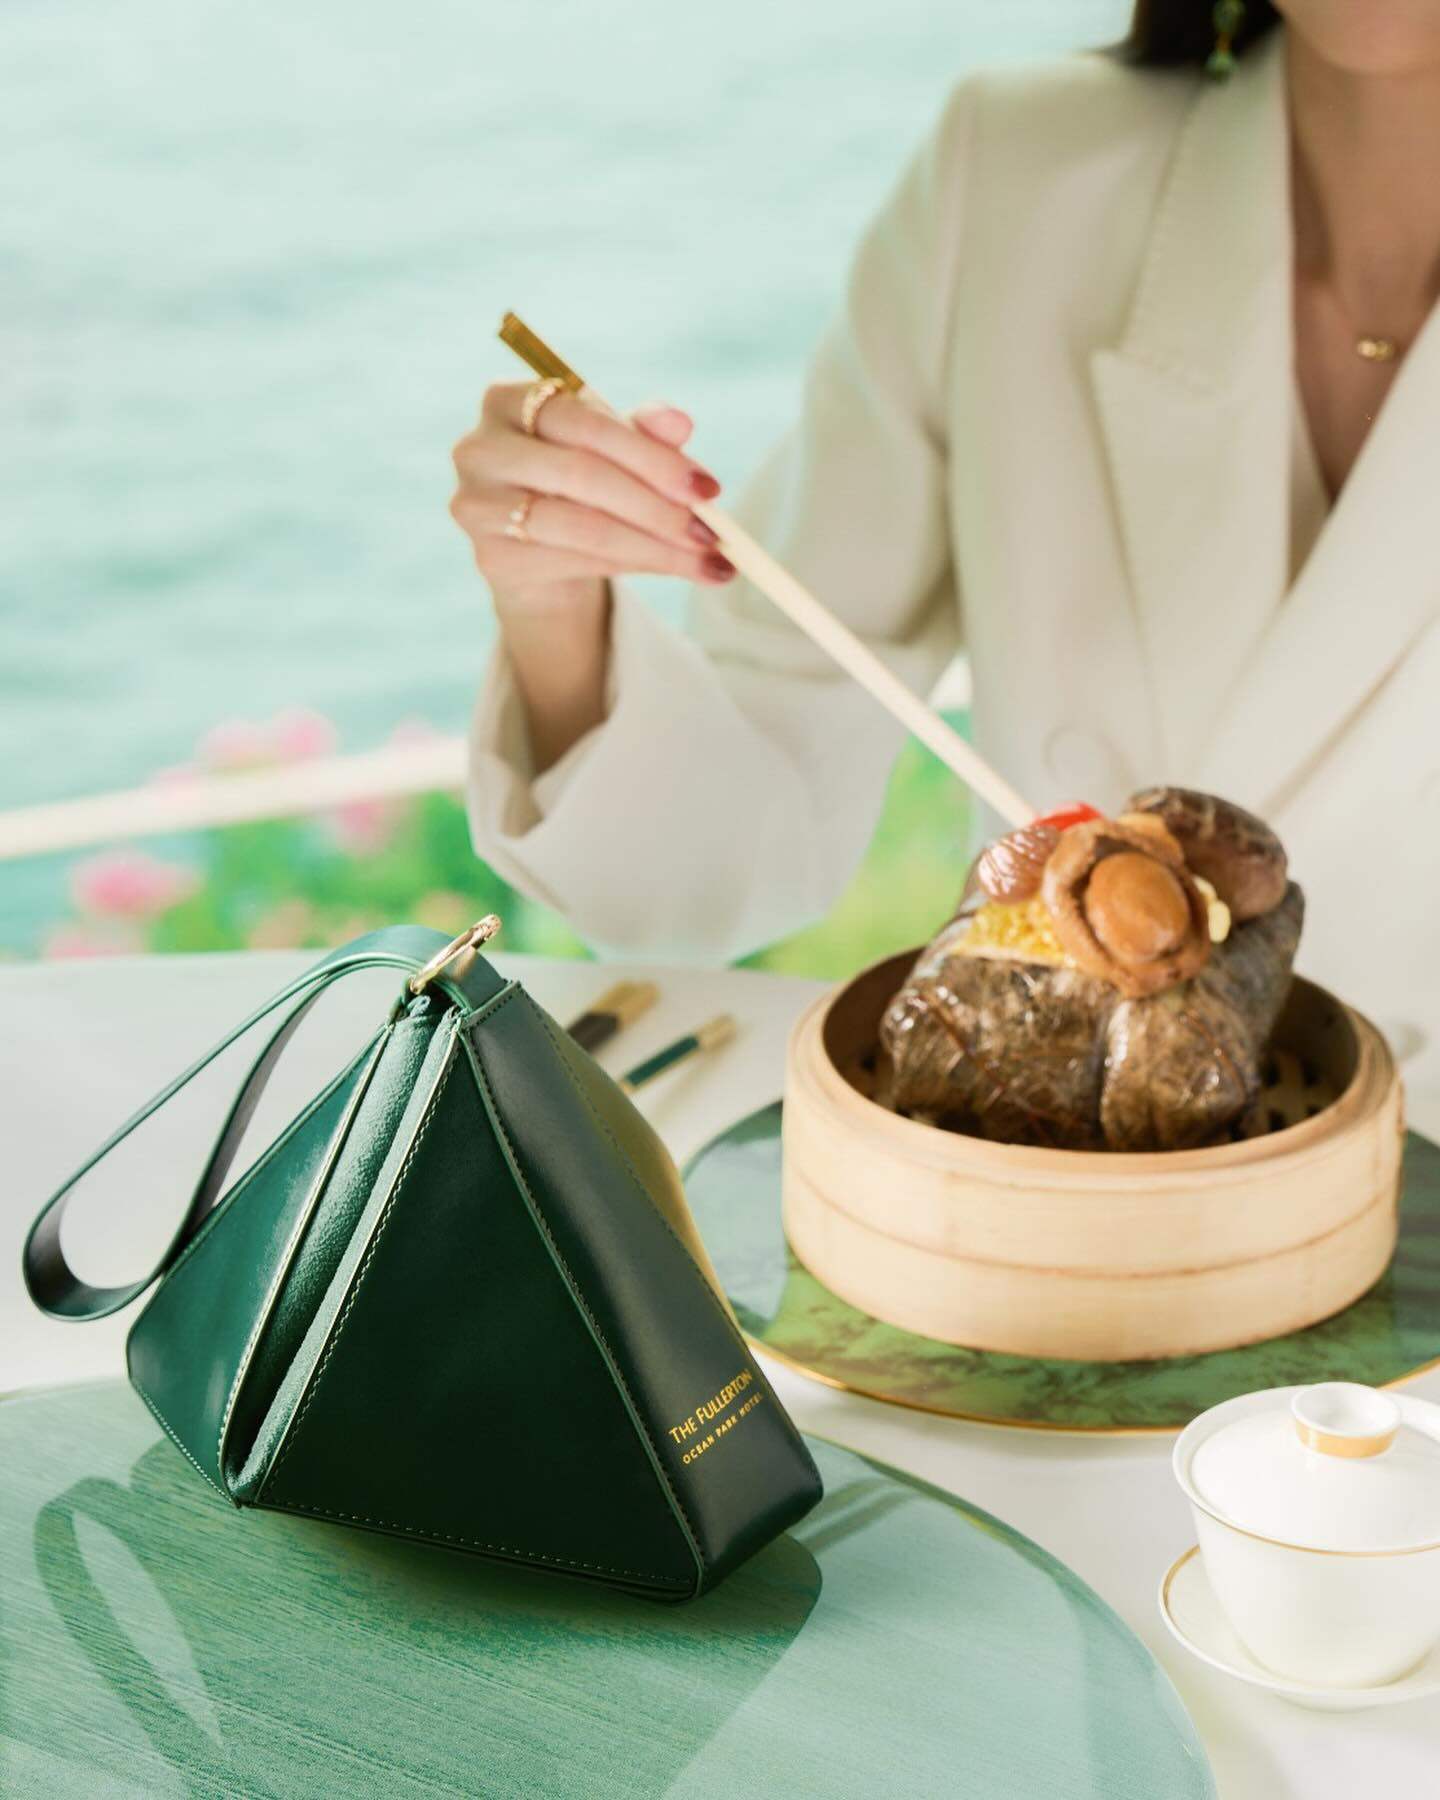 The Fullerton Ocean Park Hotel presents a special rice-dumpling-inspired bag with every purchase of rice dumplings. Photo: Fullerton Ocean Park